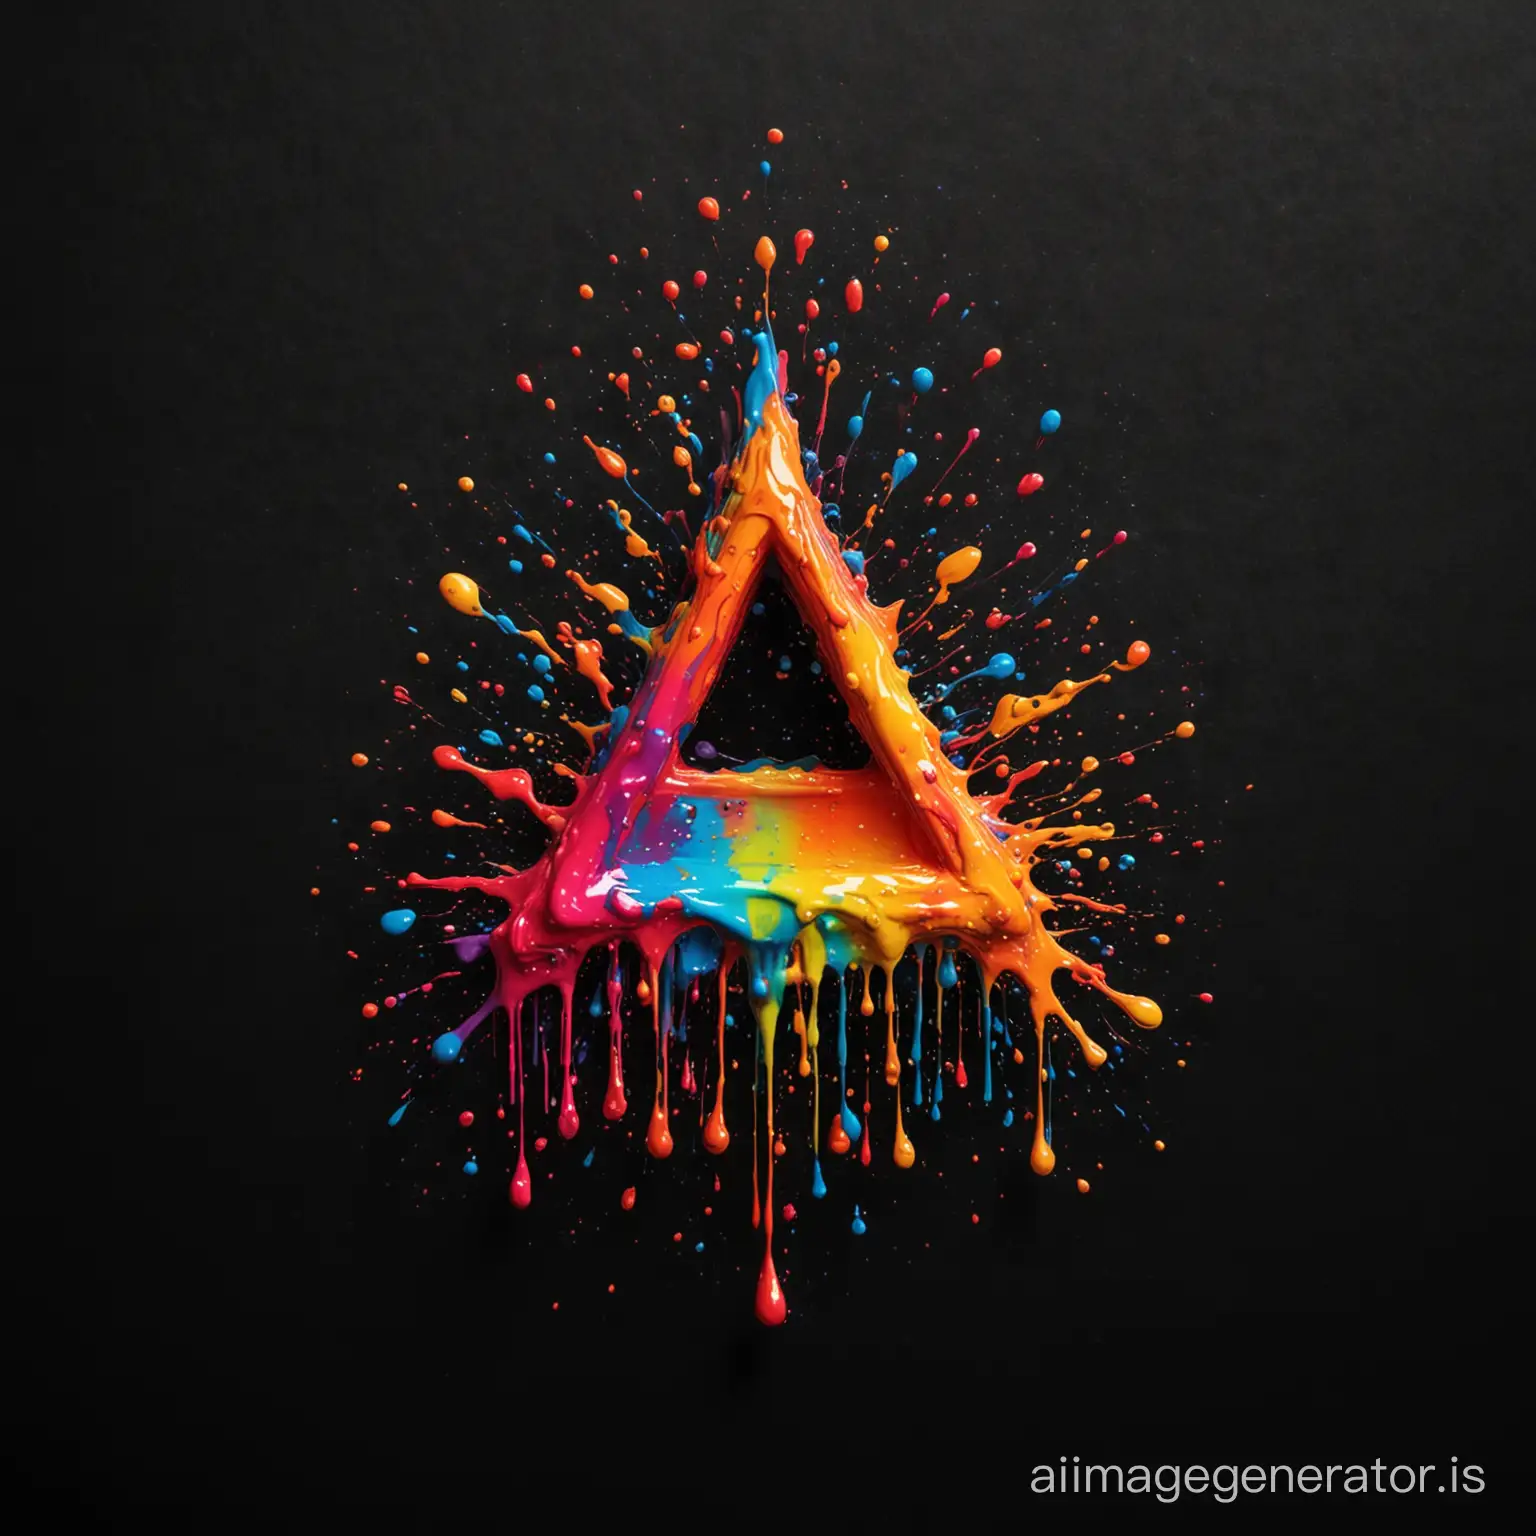 Vibrant-Liquid-Triangle-Colorful-Paint-Drops-and-Splashes-on-Black-Background